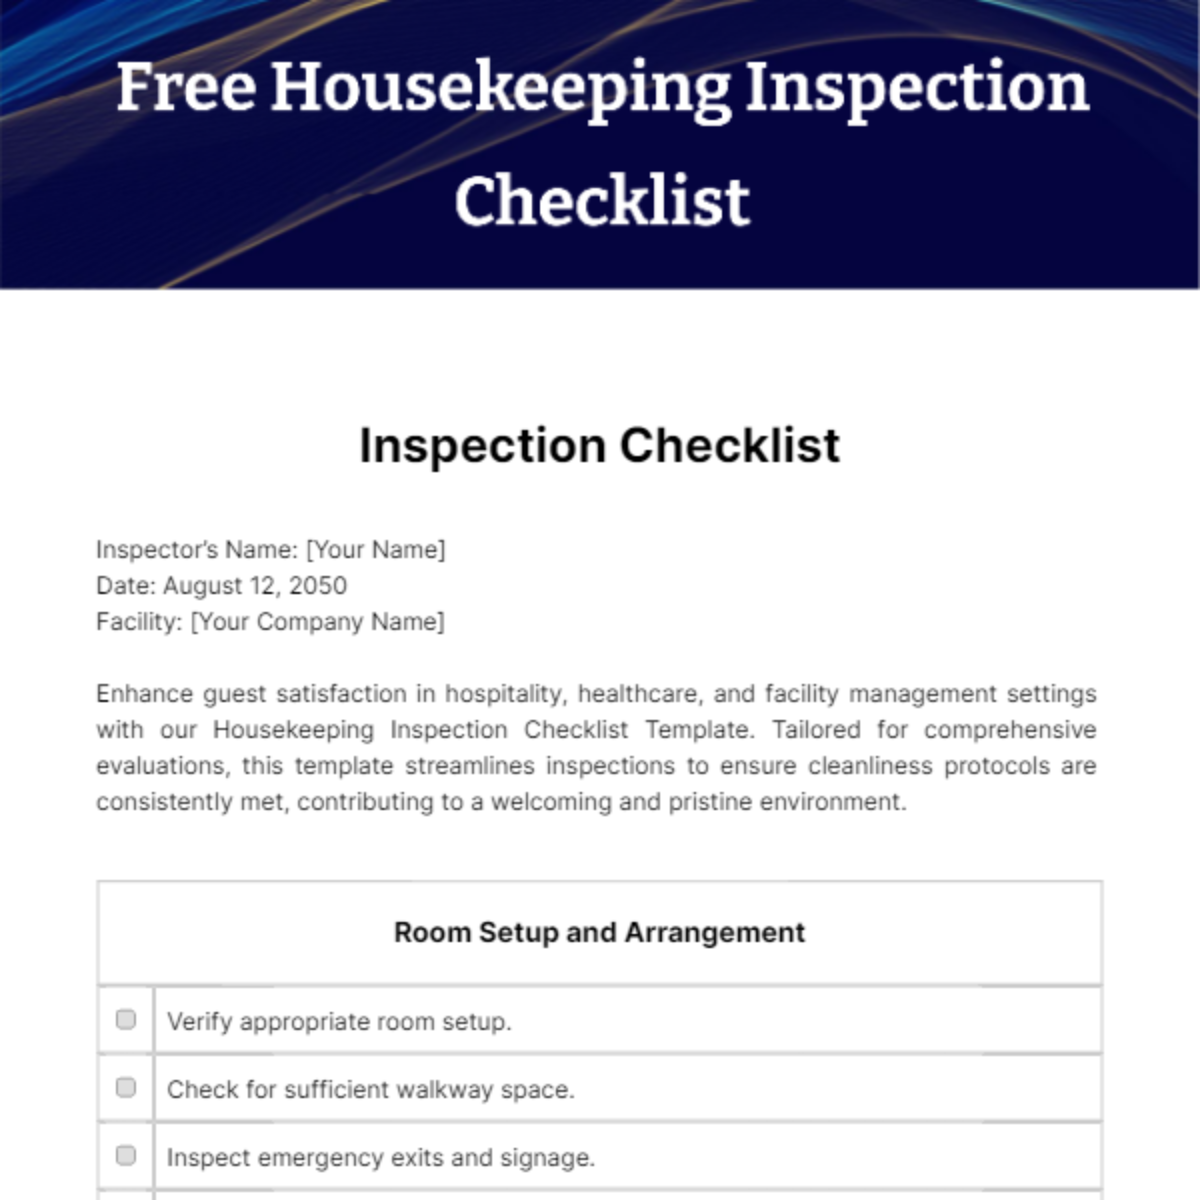 Free Housekeeping Inspection Checklist Template